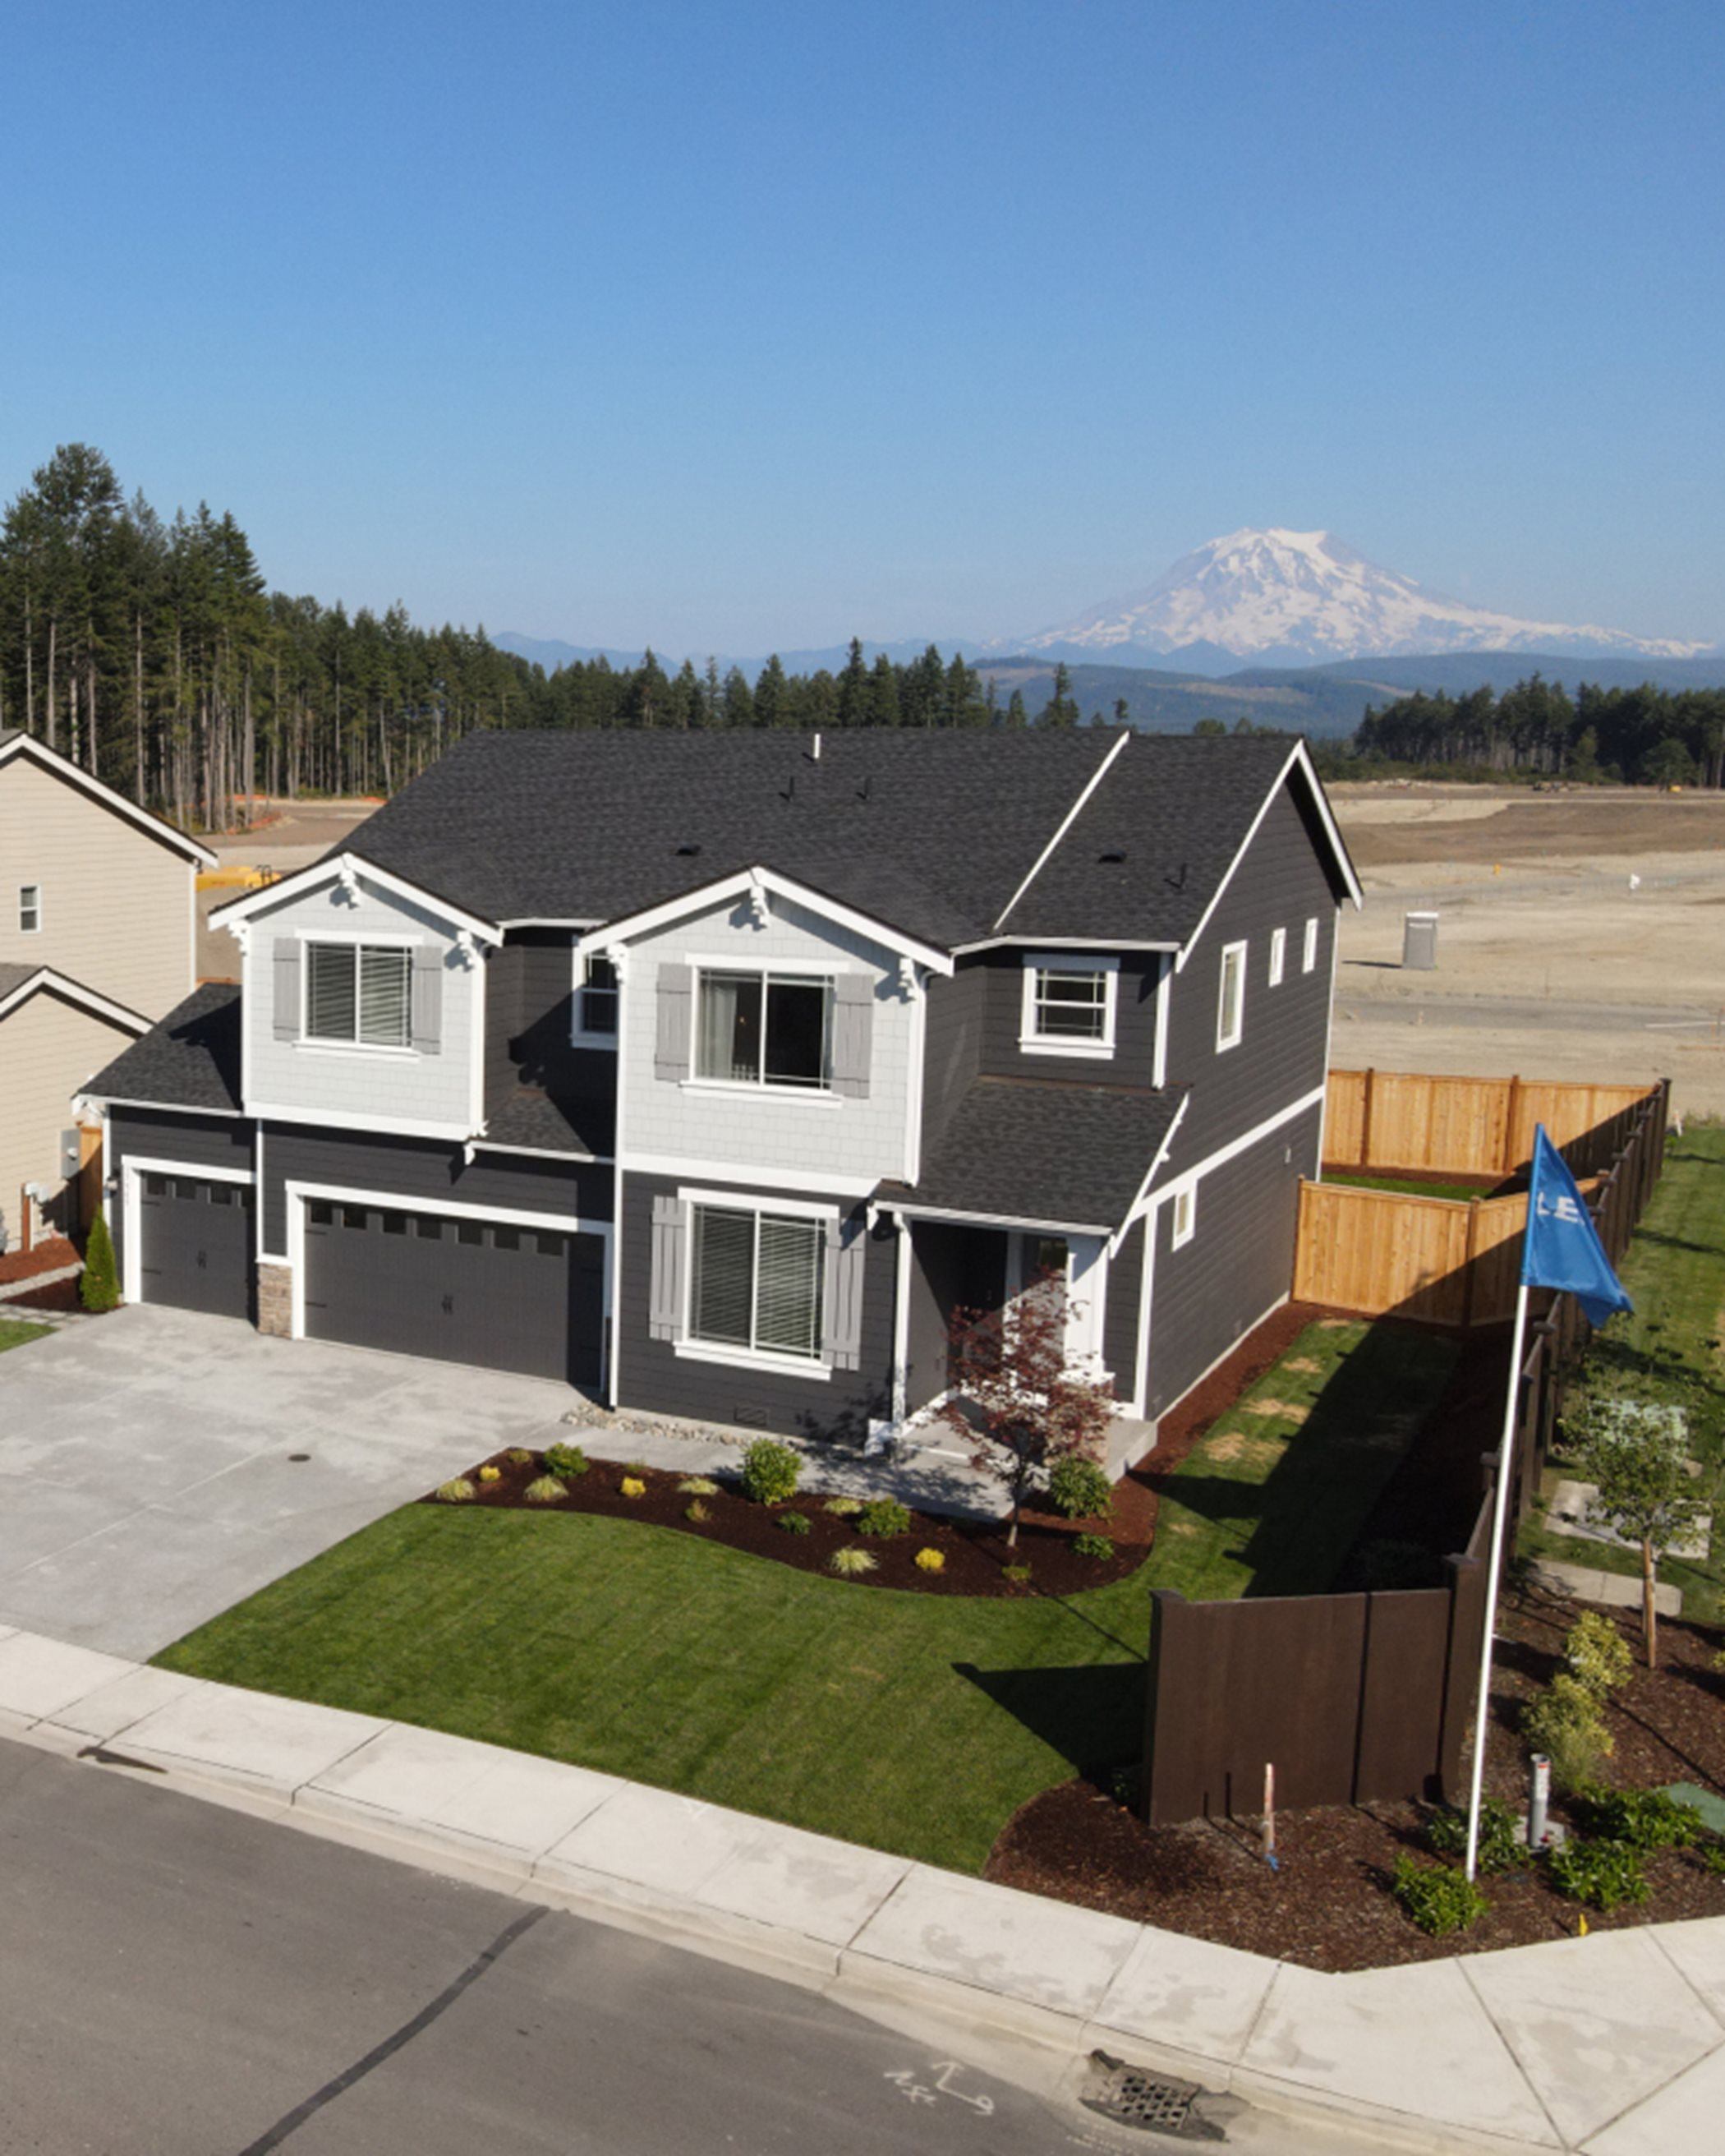 Two-story model homes with horizontal siding and double garages